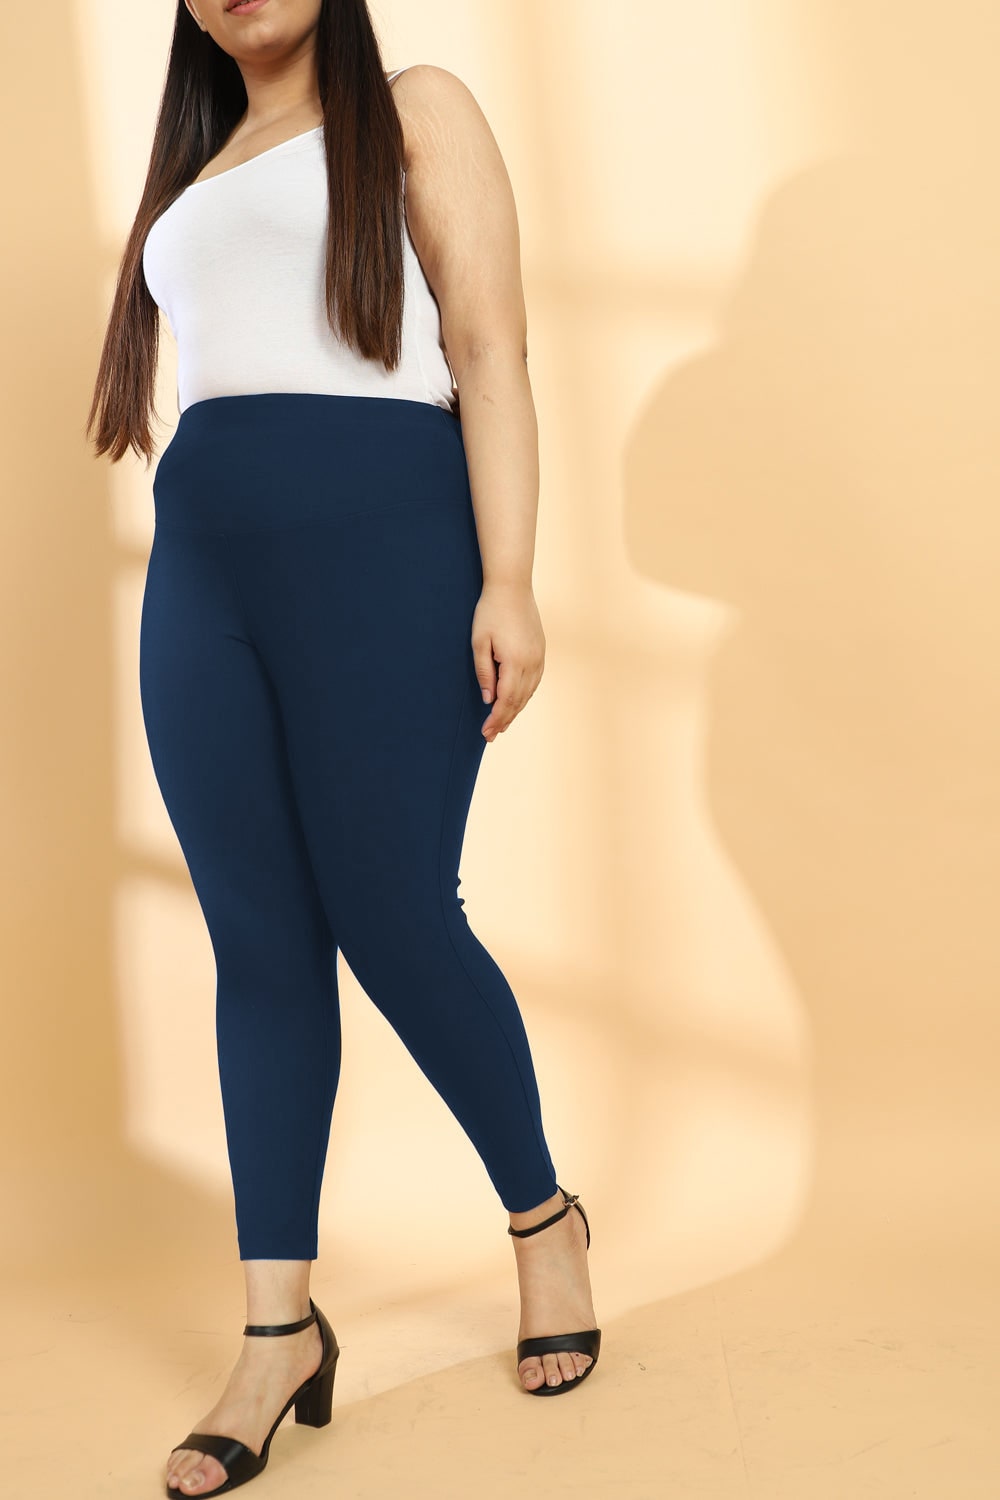 Buy Neu Look Gym wear Leggings Ankle Length Workout Pants with Phone  Pockets / Stretchable Tights / Mid Waist Sports Fitness Yoga Track Pants  for Women Girls Online In India At Discounted Prices